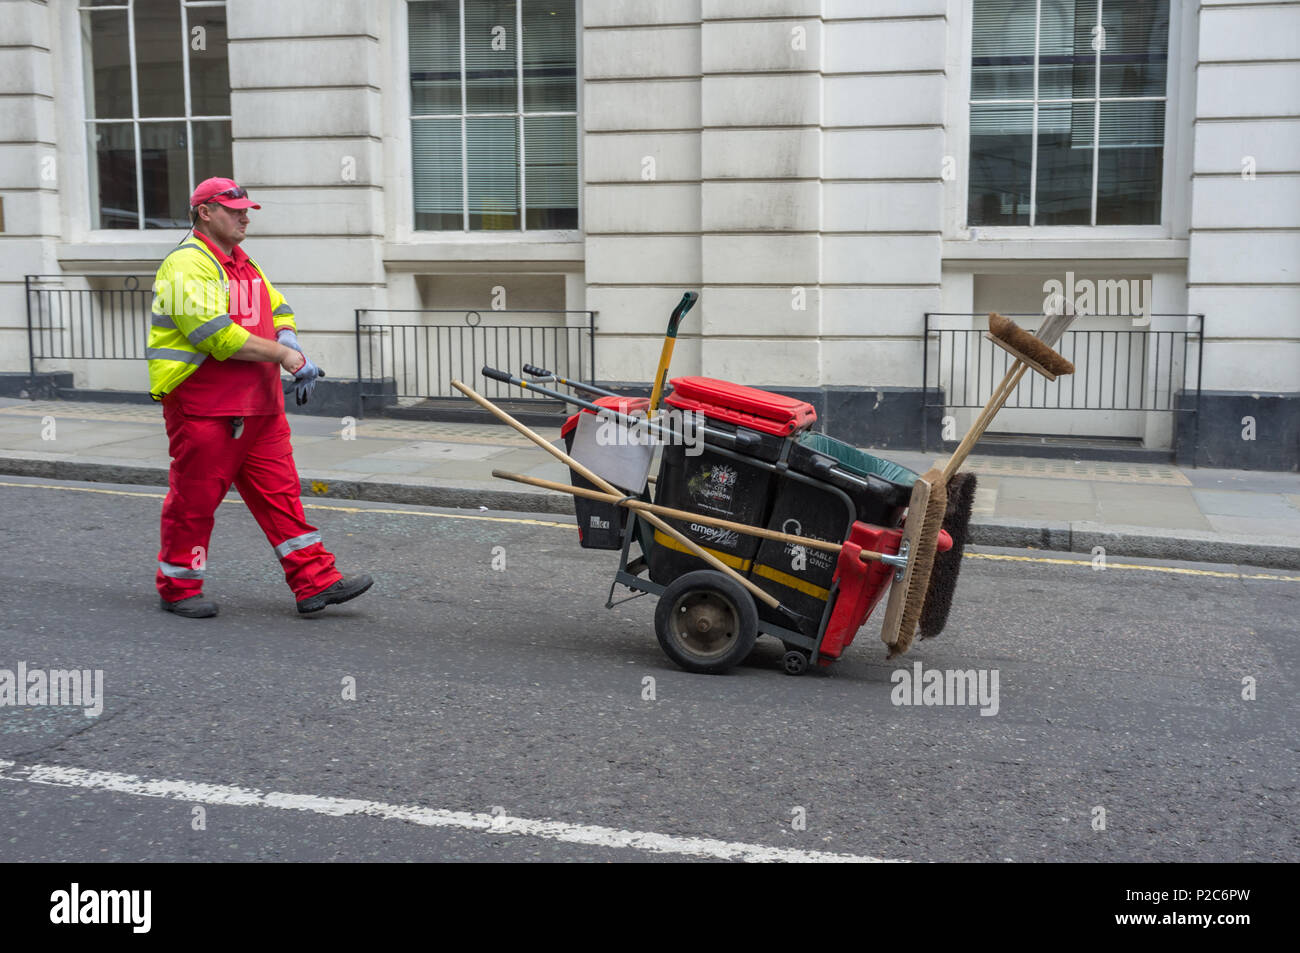 Street cleaner dressed in high visibility clothing in the City of London, England, UK. Stock Photo